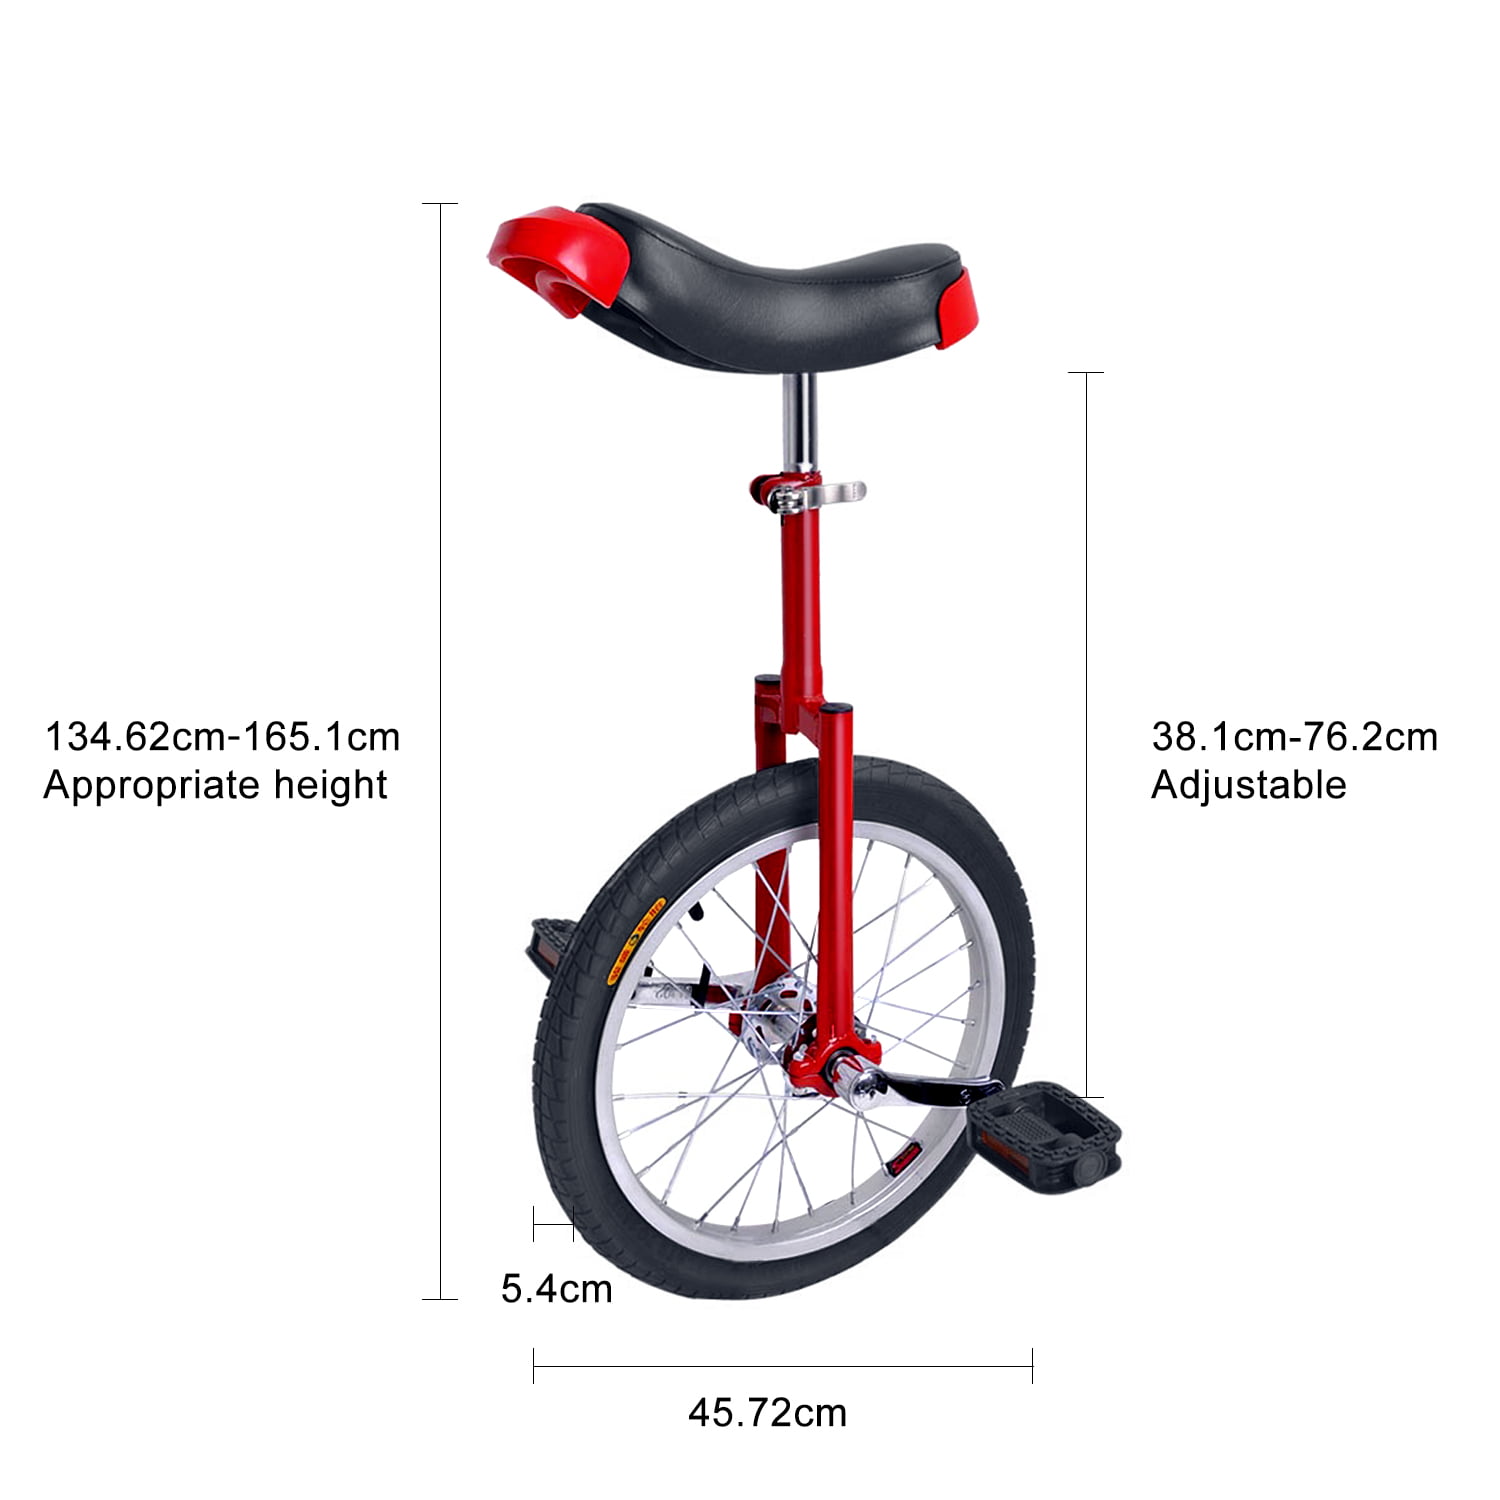 24 Inch Tire Chrome Unicycle Wheel Training Style Cycling w/ Stand Release Saddel Seat Balance Mountain Exercise Bike Red